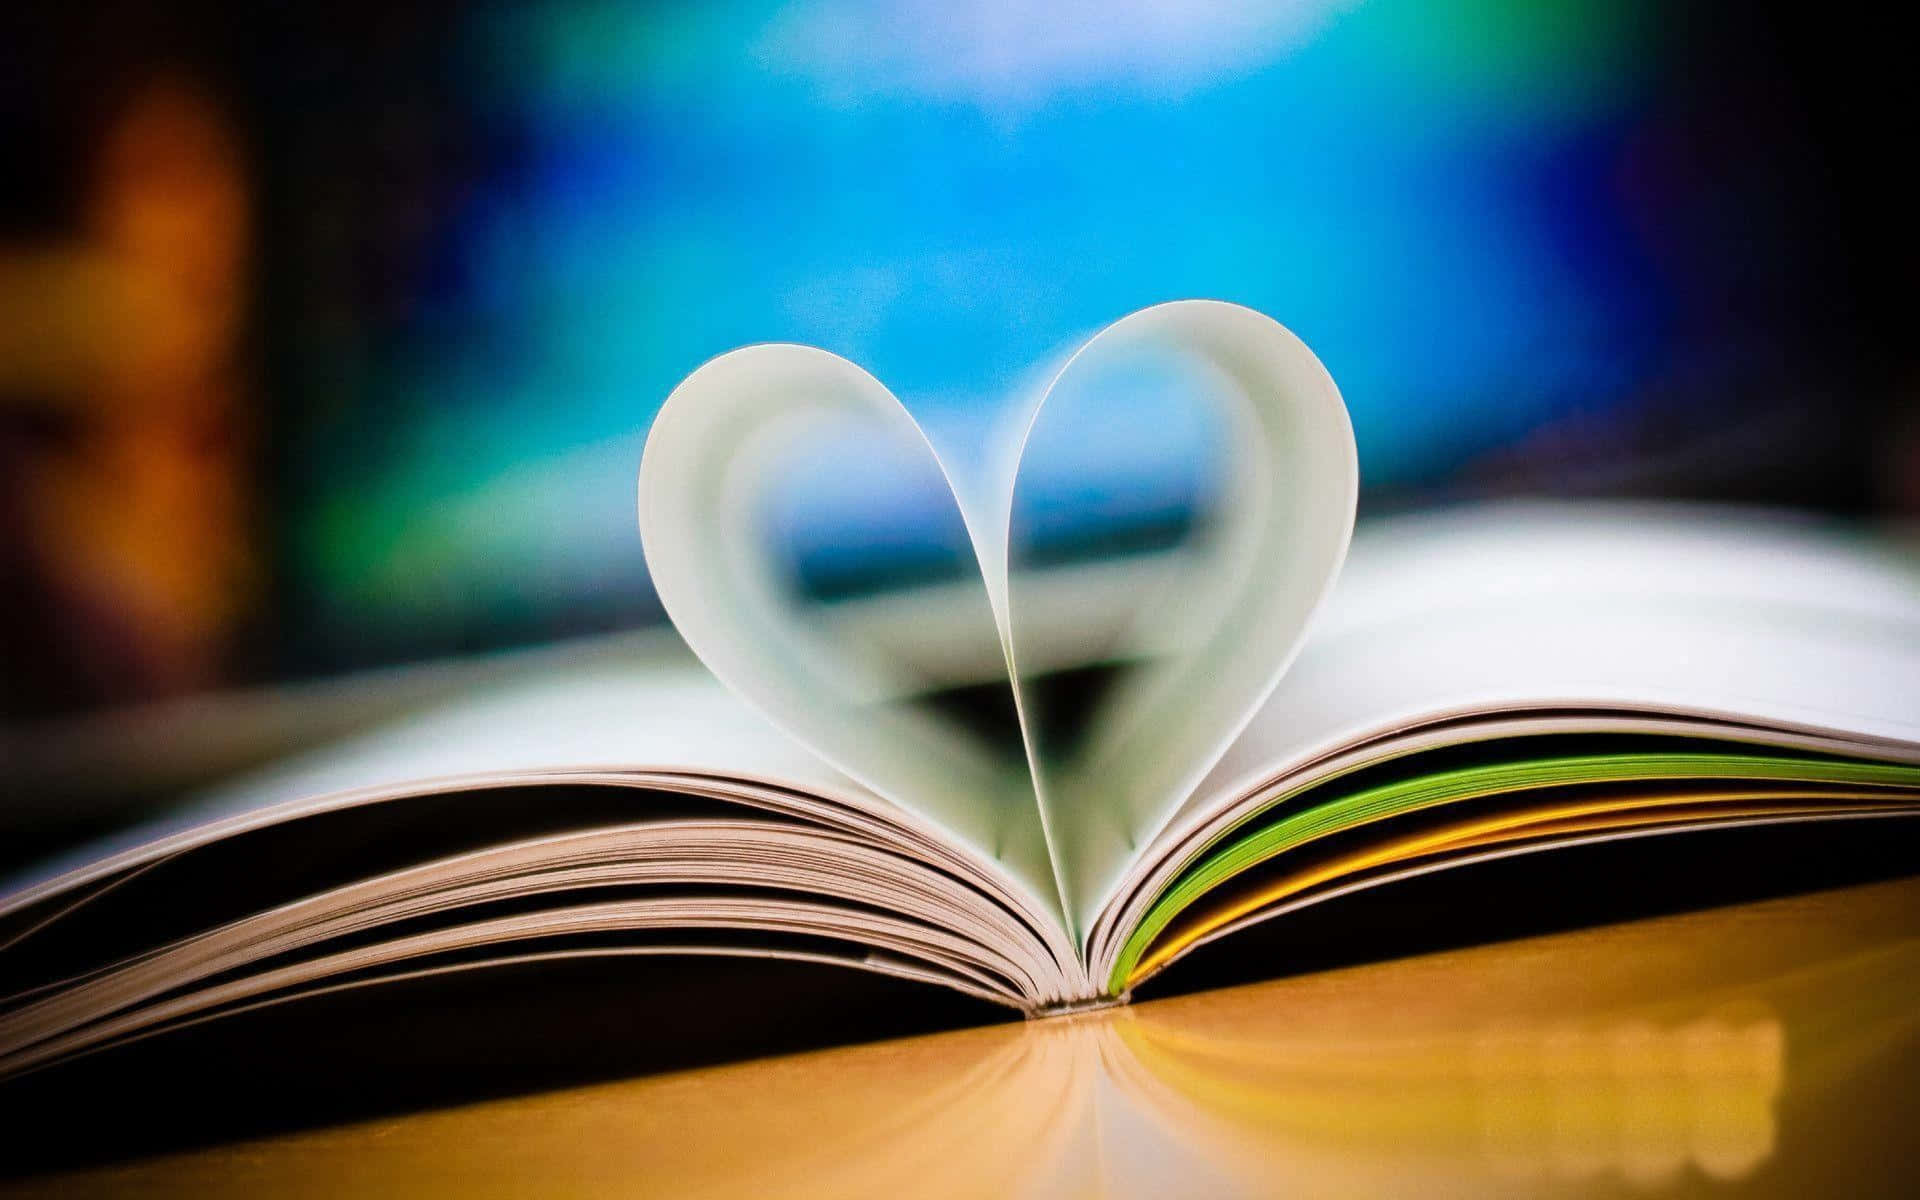 Best Desktop Pc Background Aesthetic Book With Heart-shaped Page Background